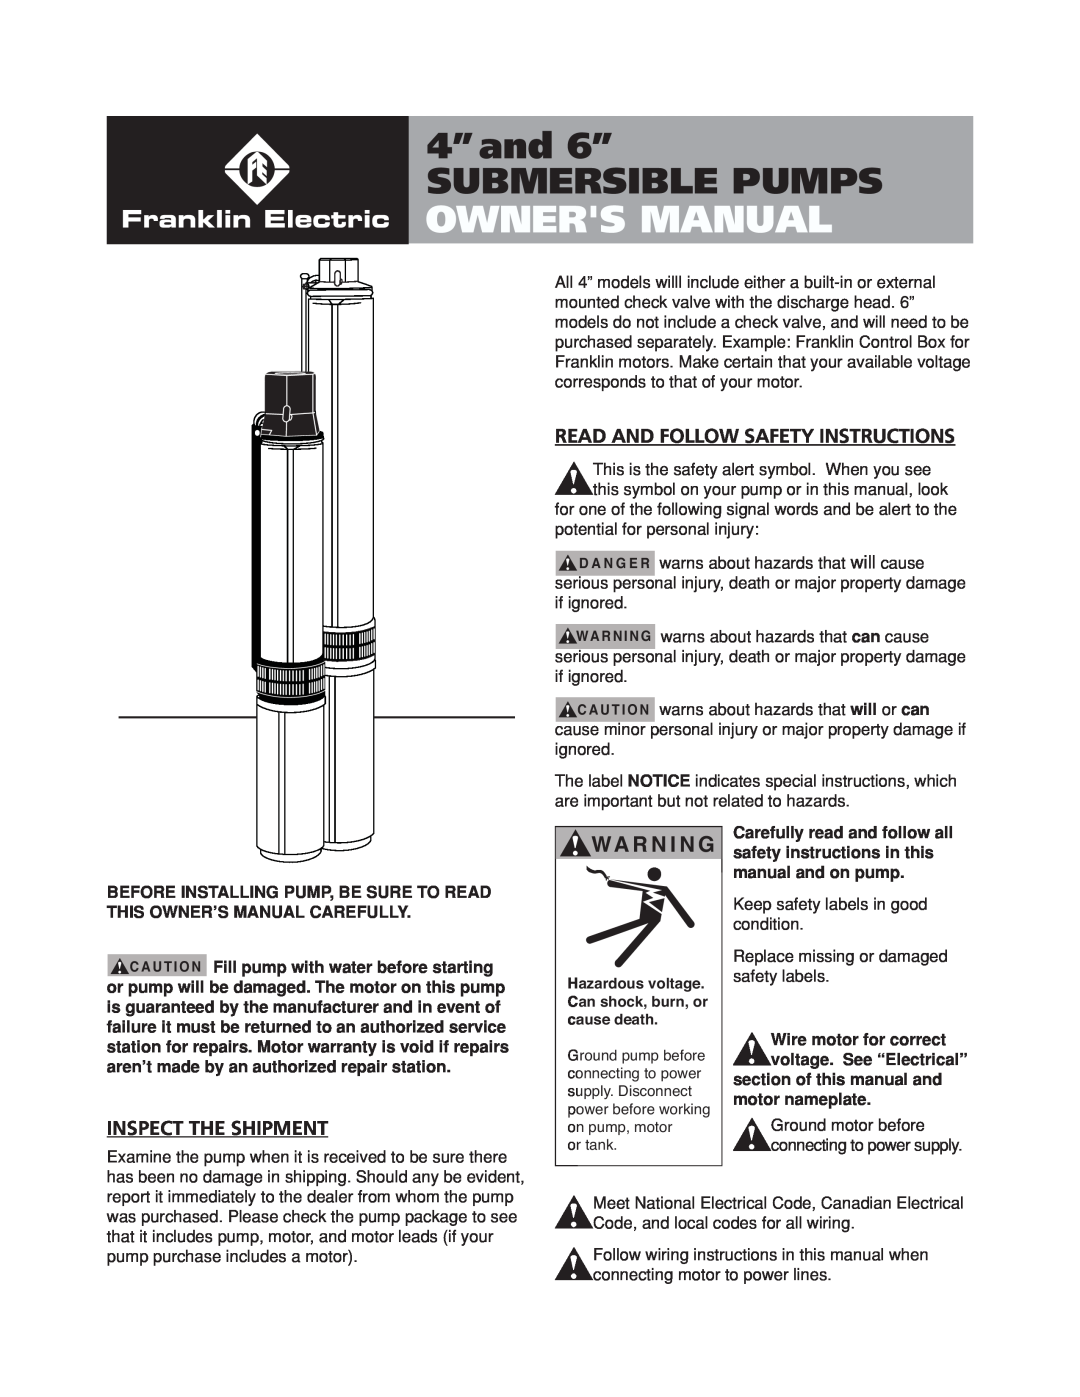 Franklin Submersible Well Pump owner manual Read And Follow Safety Instructions, Inspect The Shipment, Owners Manual 